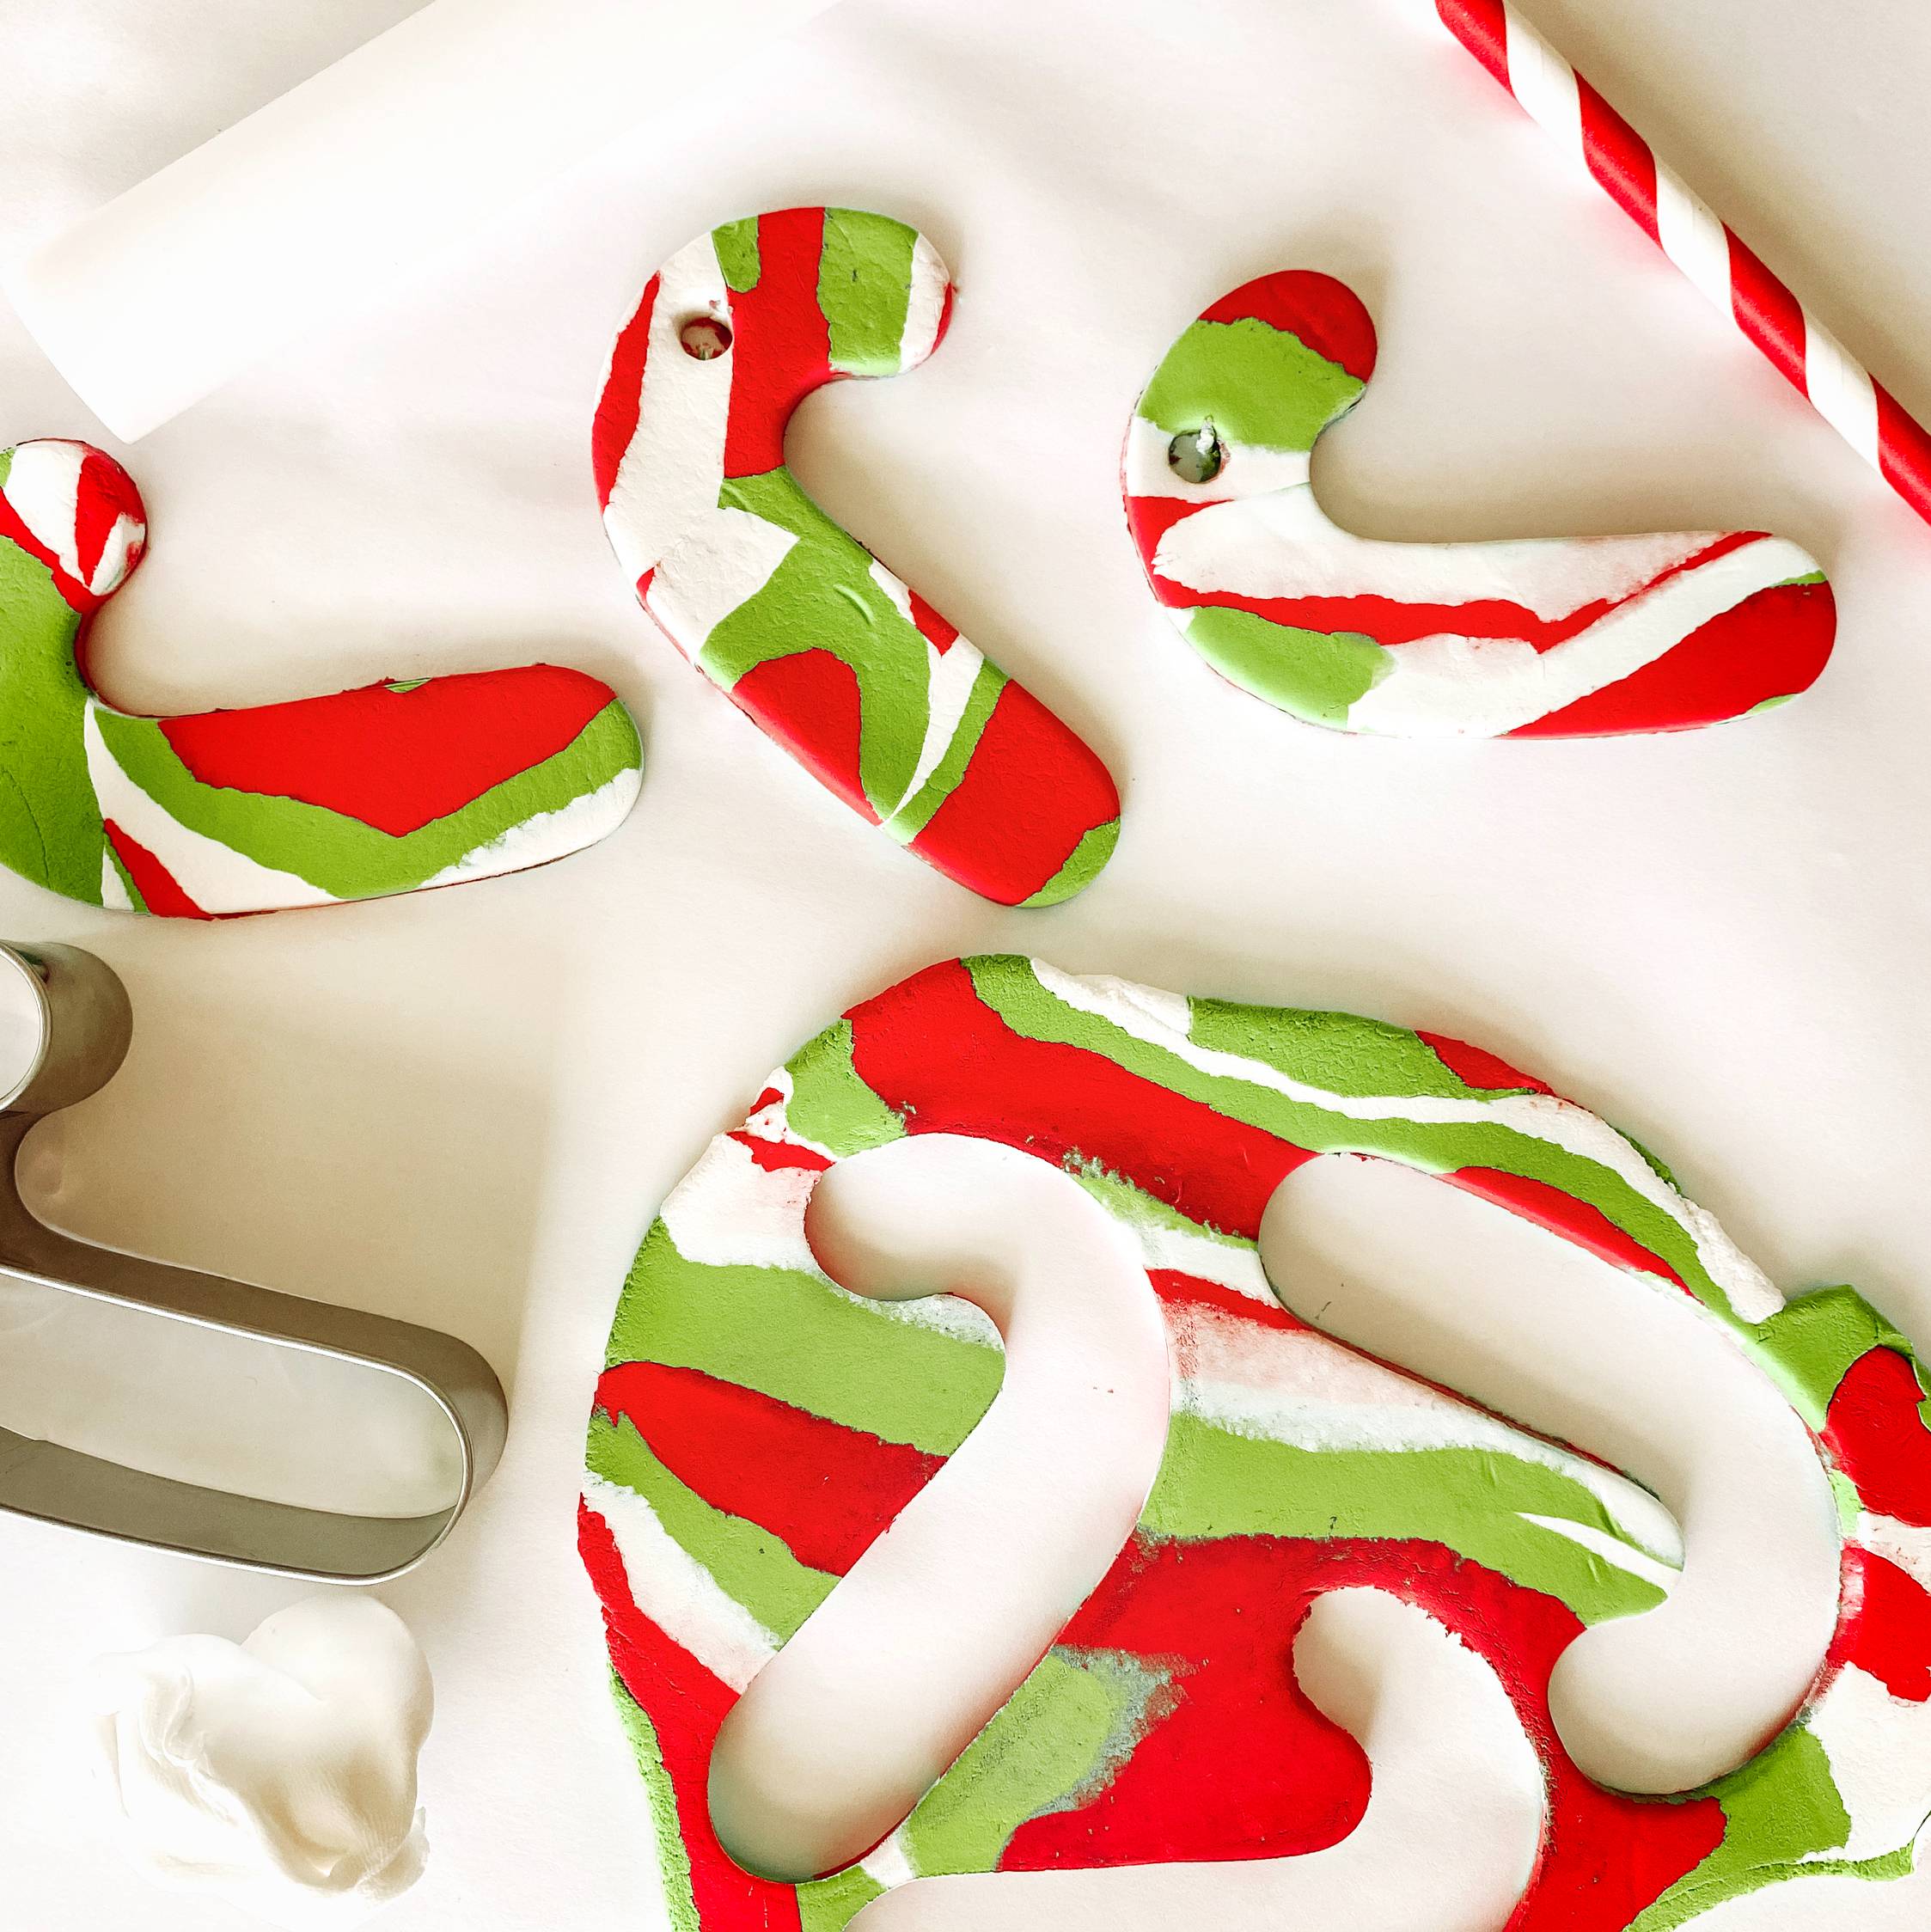 Colorful candy canes made out of clay on a white surface